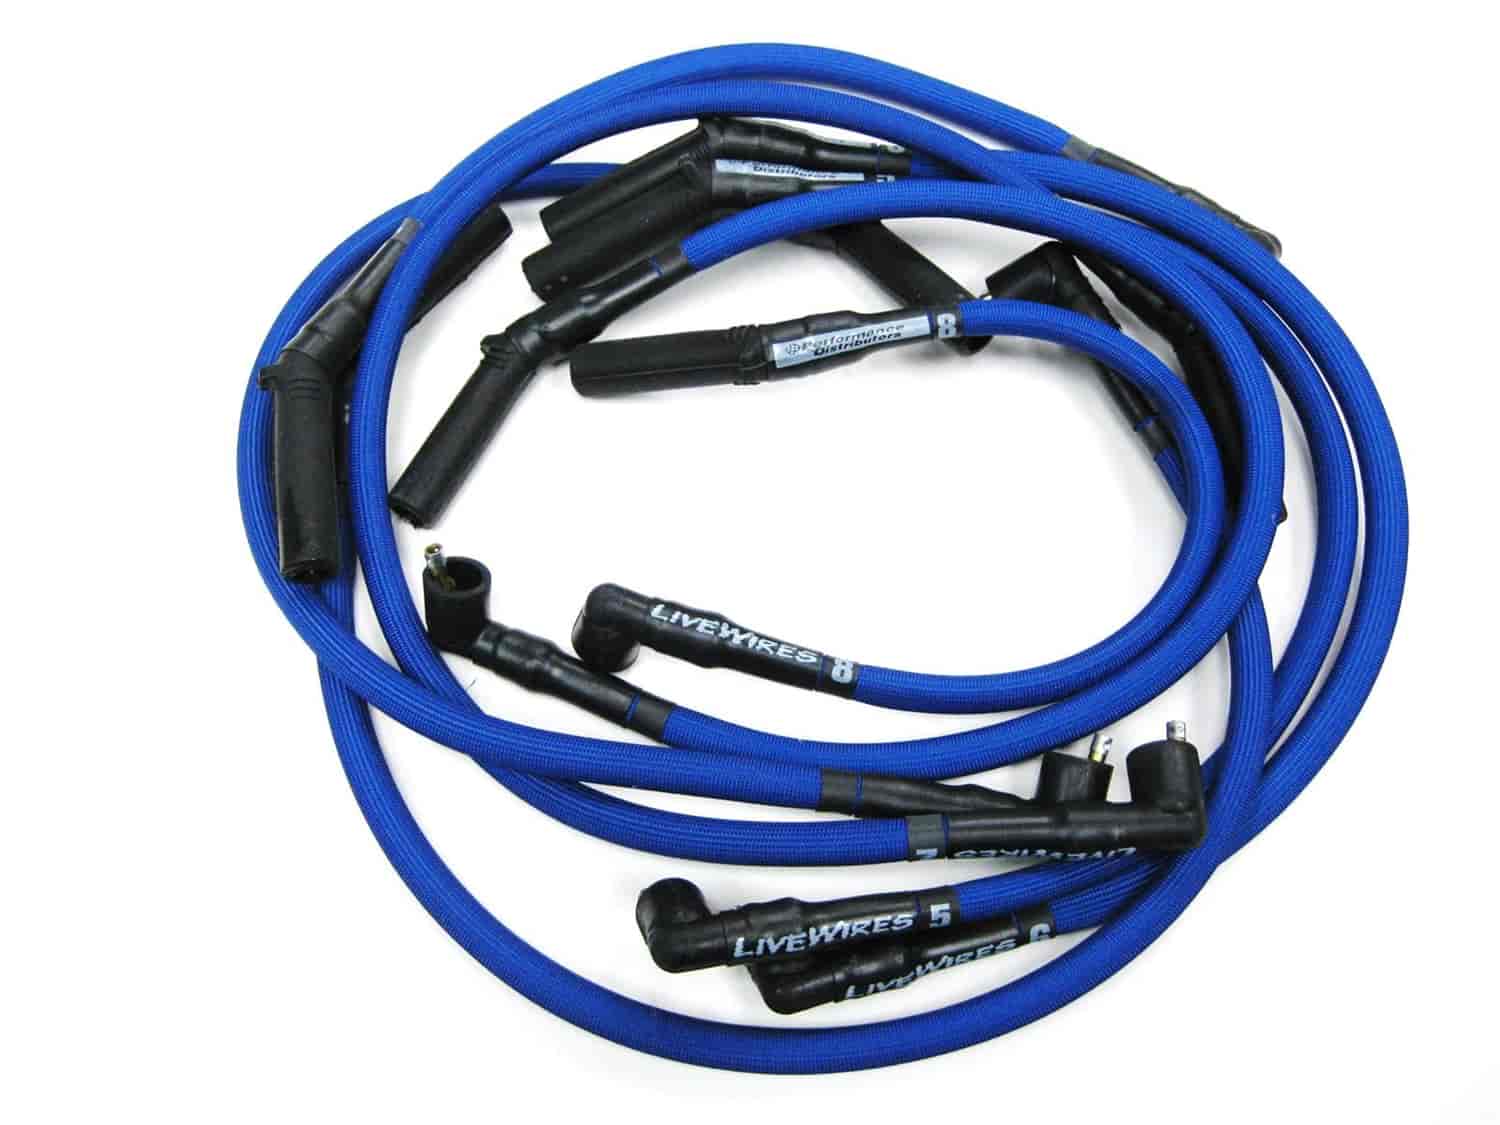 Plug Wires- HEI Term -Black-1996-?98 4.0L & 4.6L Range Rover and 4.0L Discovery